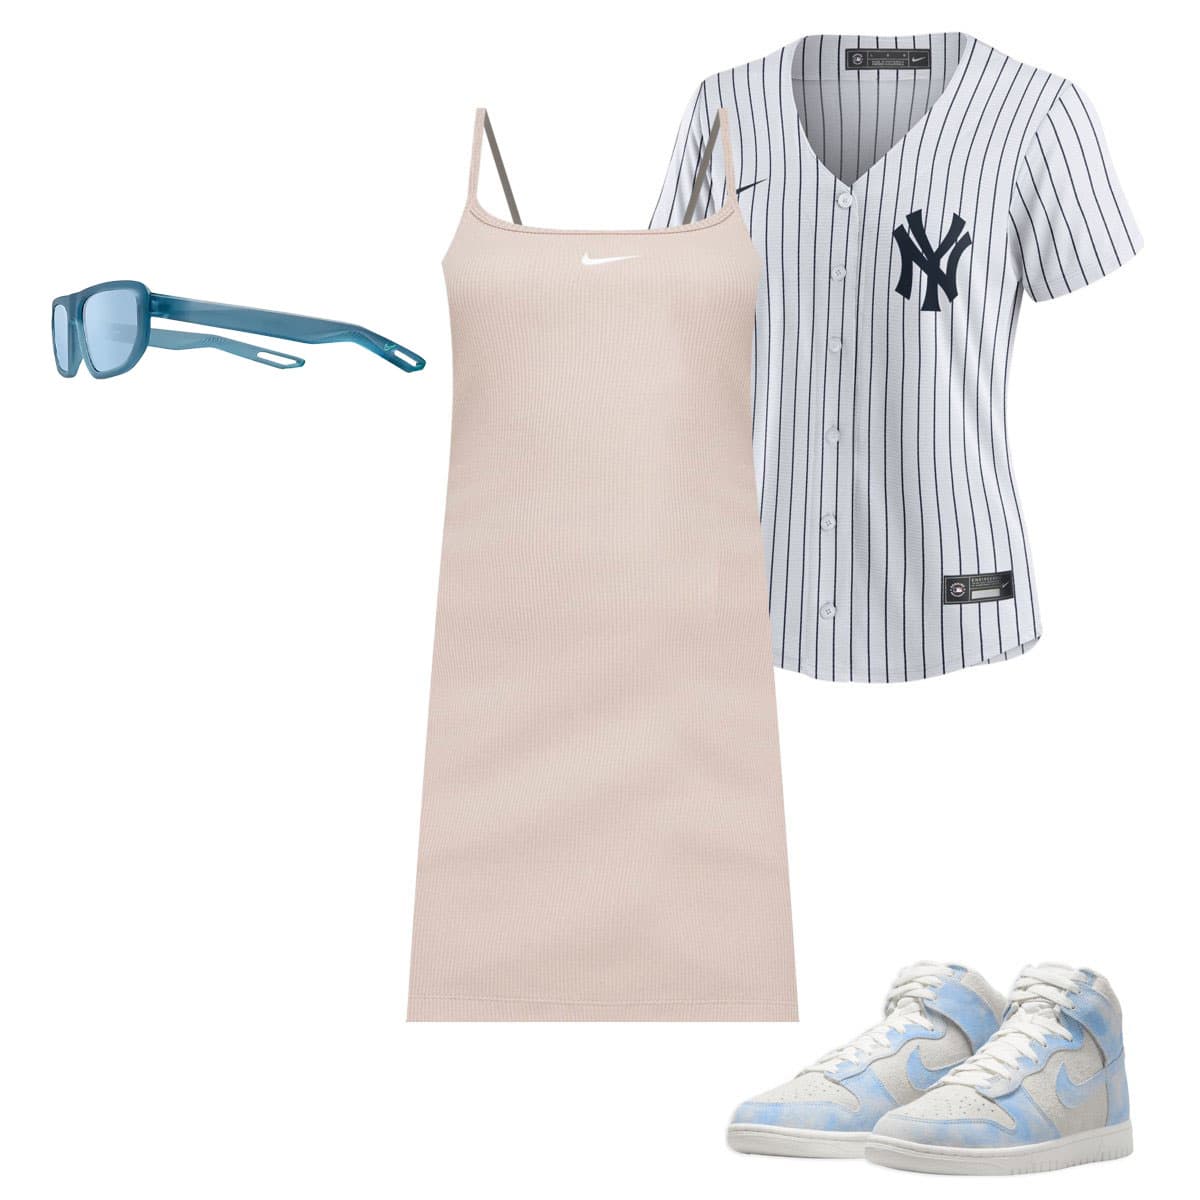 baseball button up jersey outfit